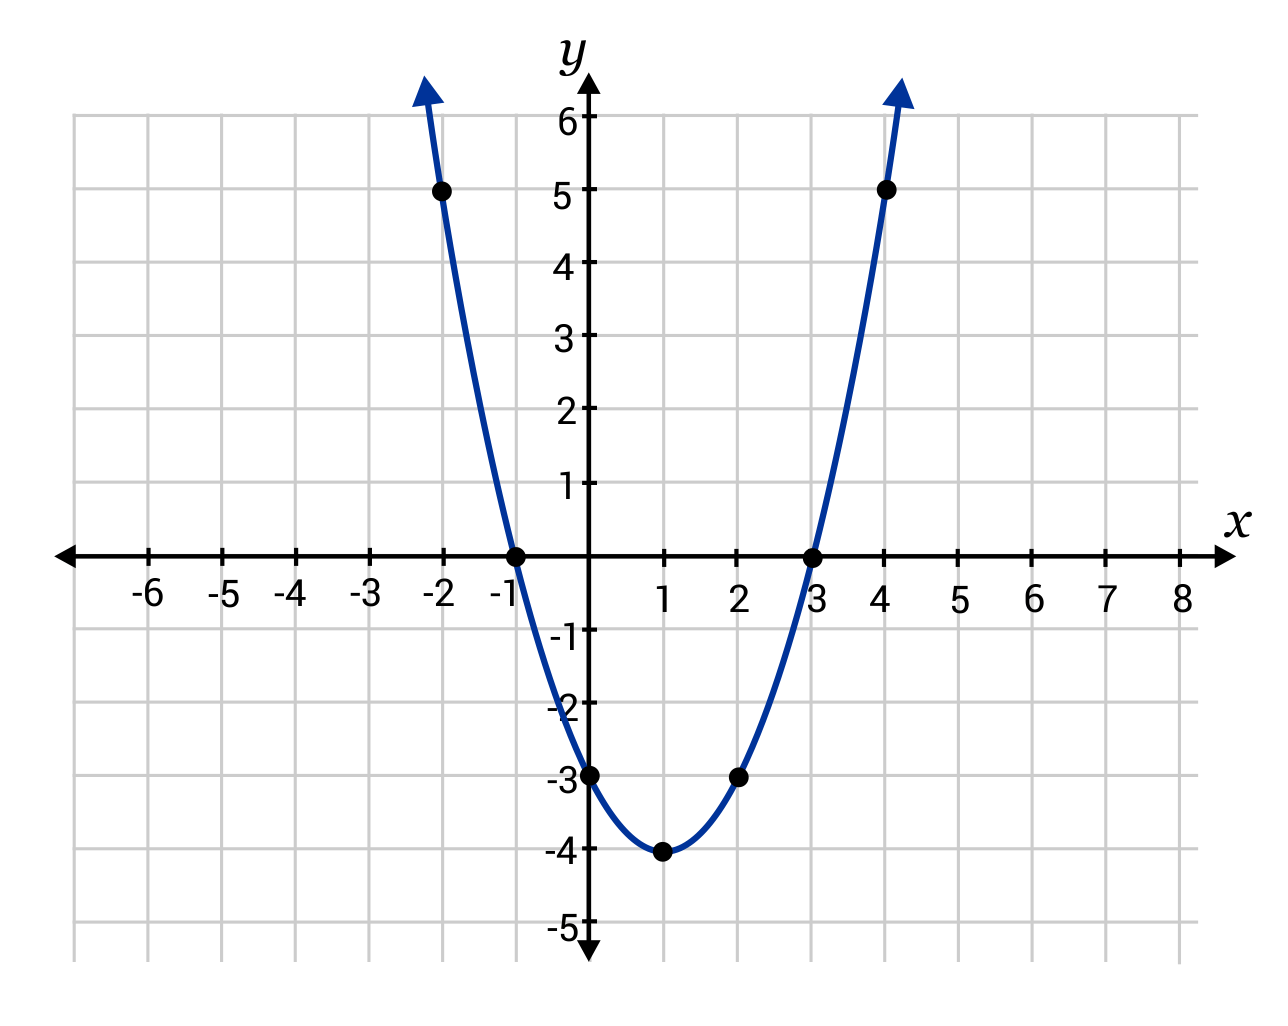 parabola graphed with points at (-1, -2), (-1, 0), (0, -3), (1, -4), (2, -3), and (3, 0)